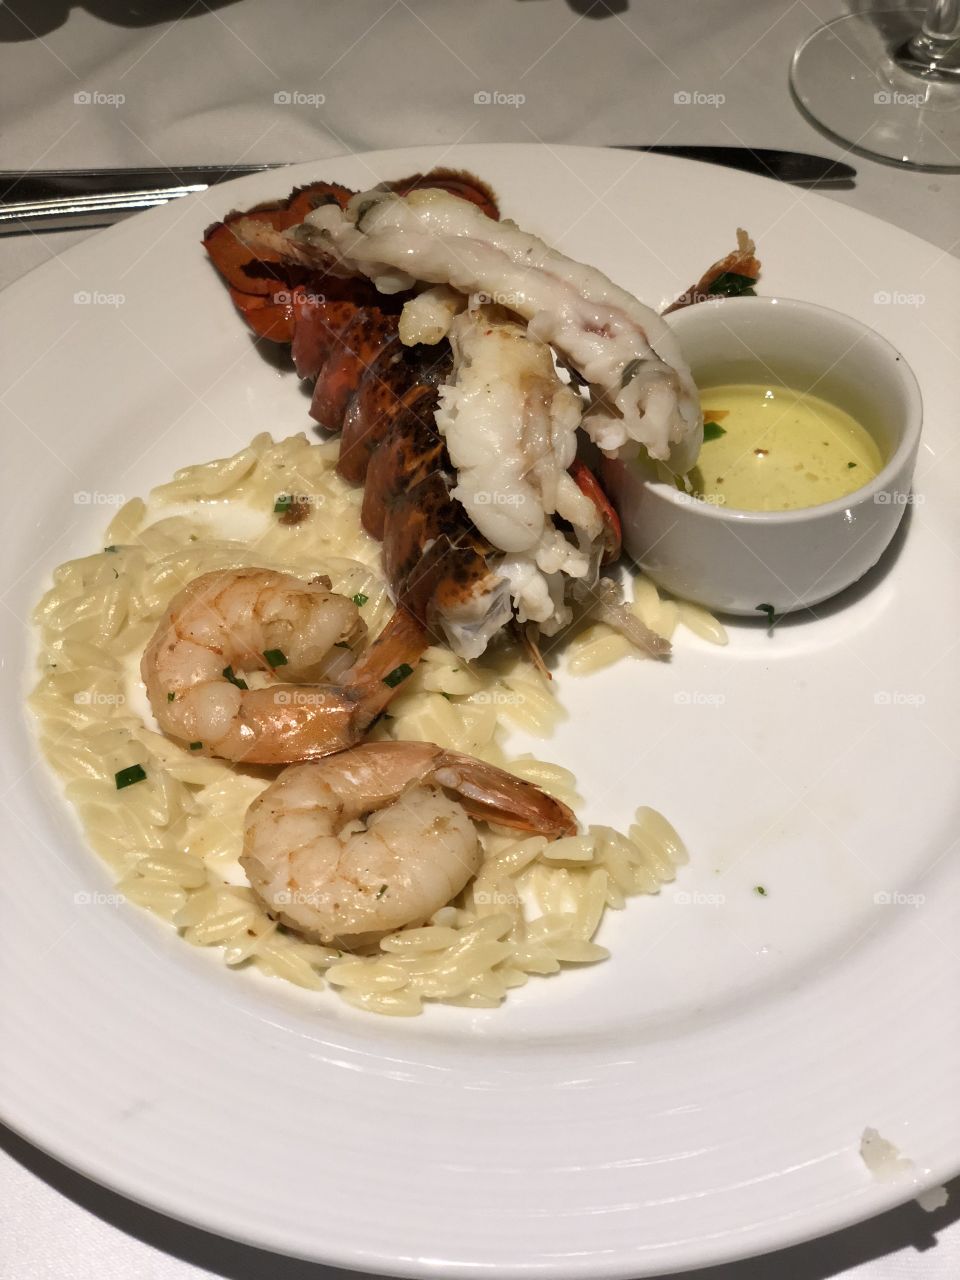 Carnival Sunshine Cruise Dinner during our vacation. Lobster and shrimp 